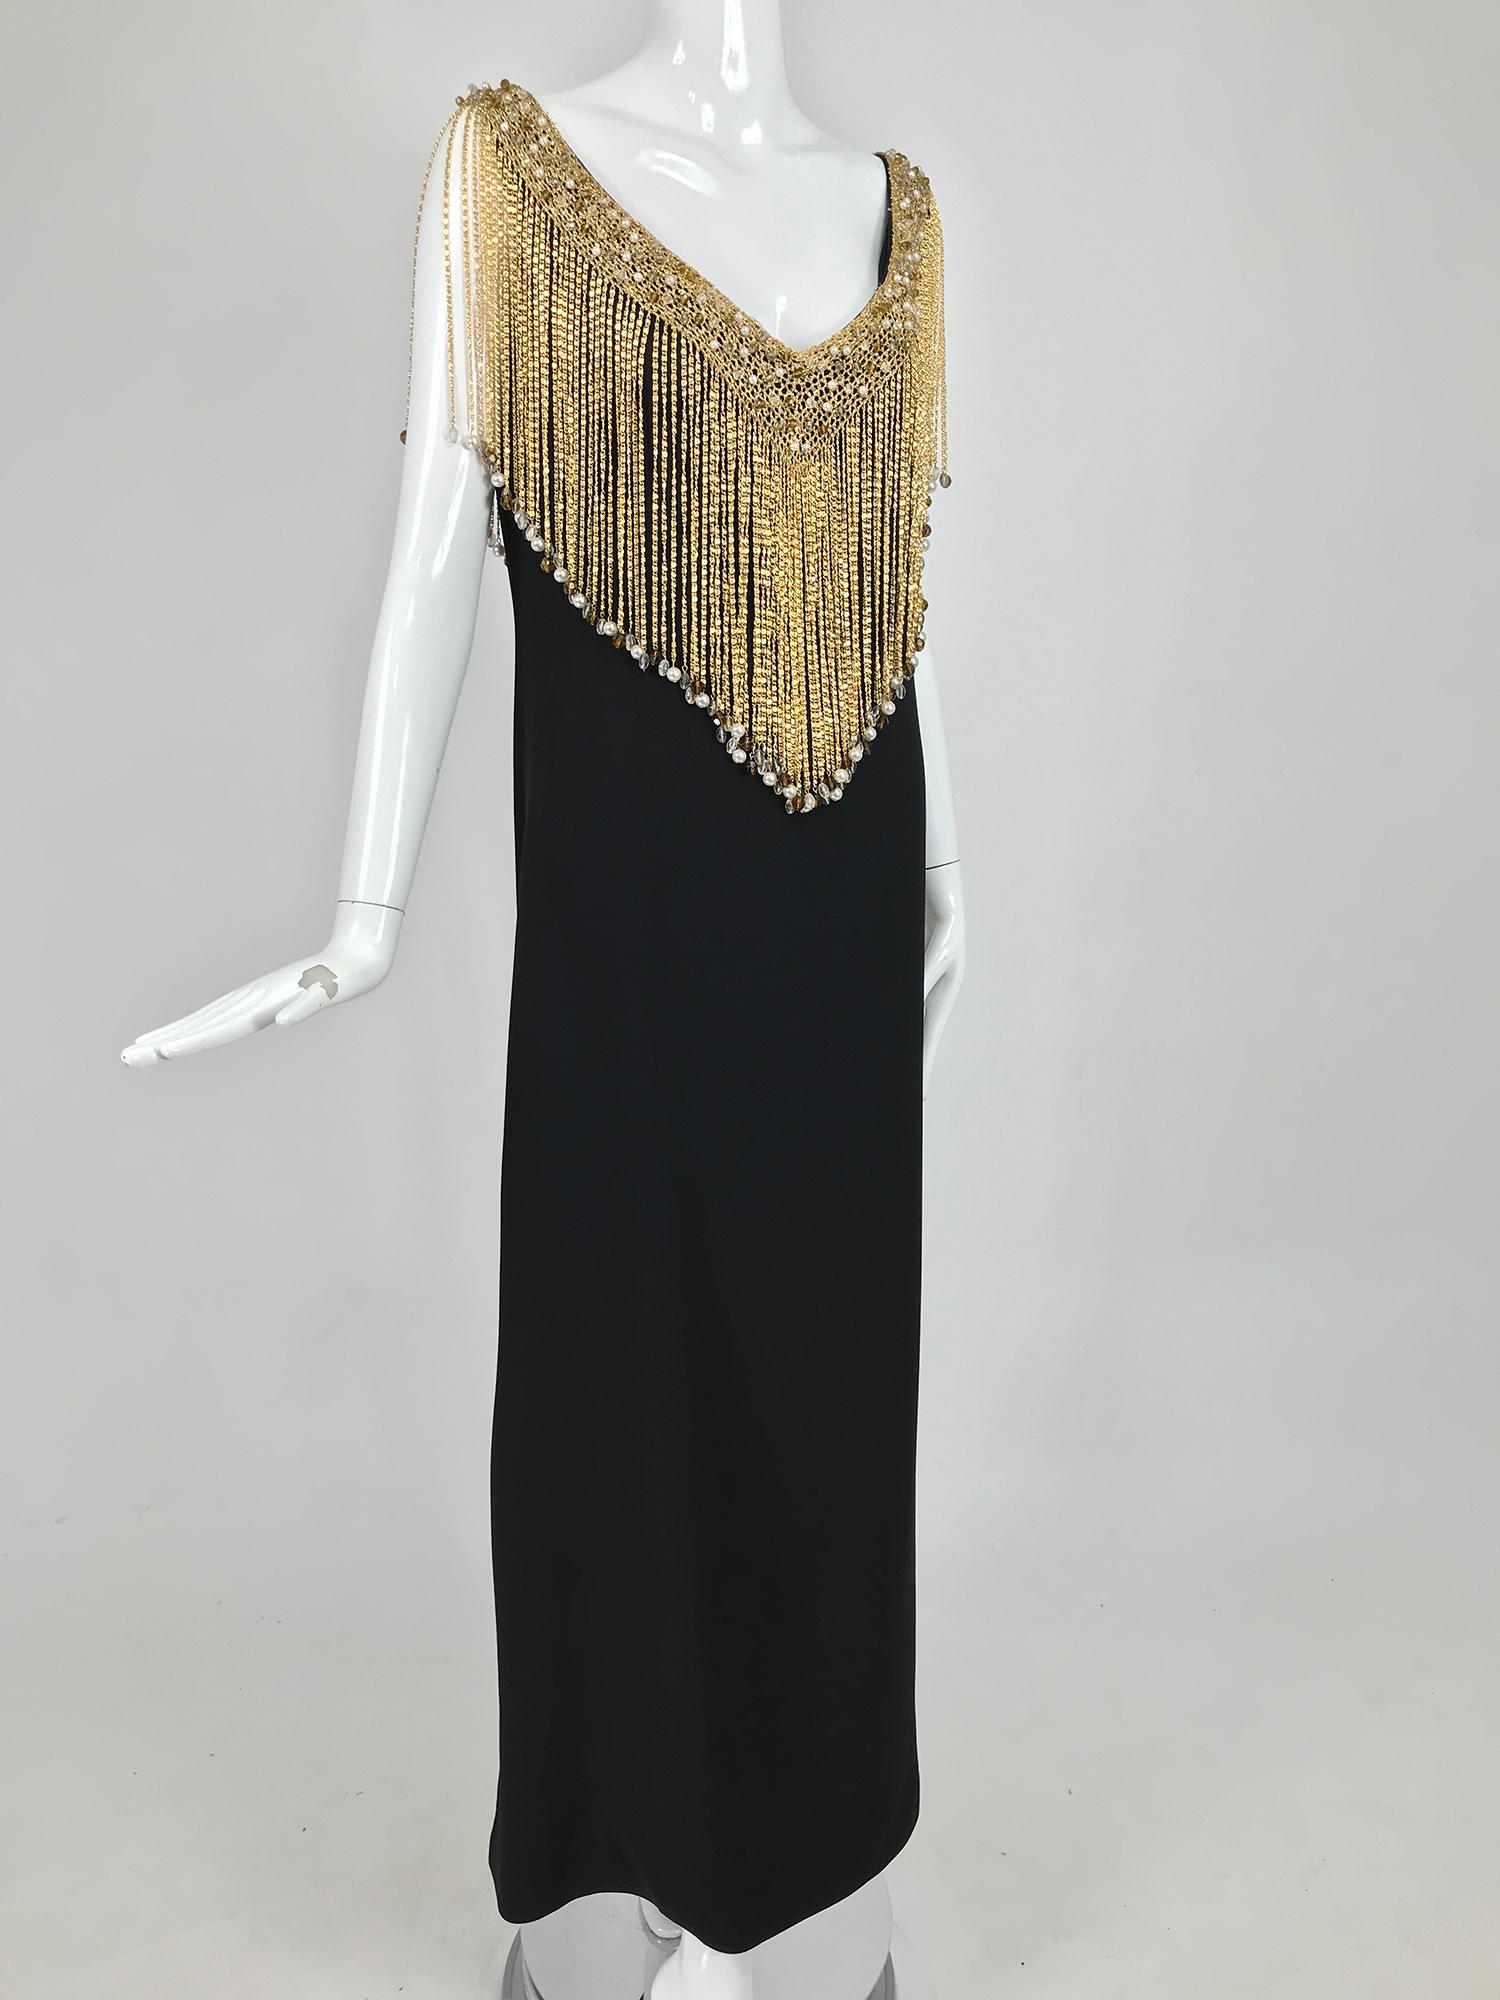 Loris Azzaro Couture gold metal chain fringe, jewel trim collar, black sleeveless maxi dress from the 1970s. One of the most fabulous Azzaro dresses from the 1970s, this black A line sheath is the perfect canvas for the deep cape fringe trim. The